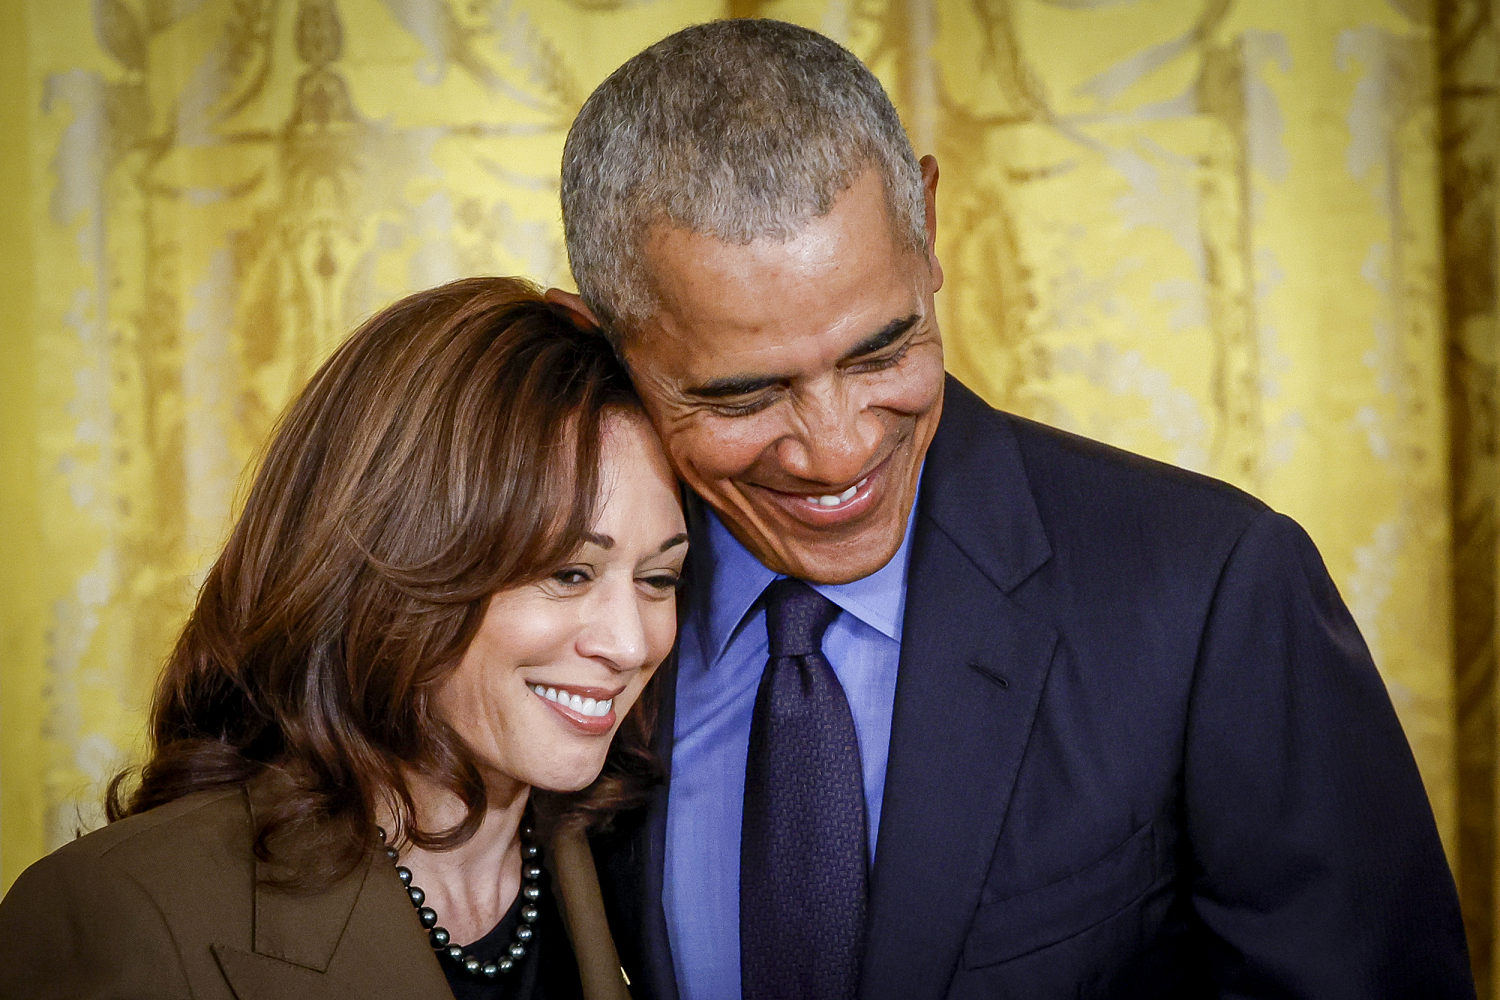 Obama endorses Harris for president in a whirlwind week of party support